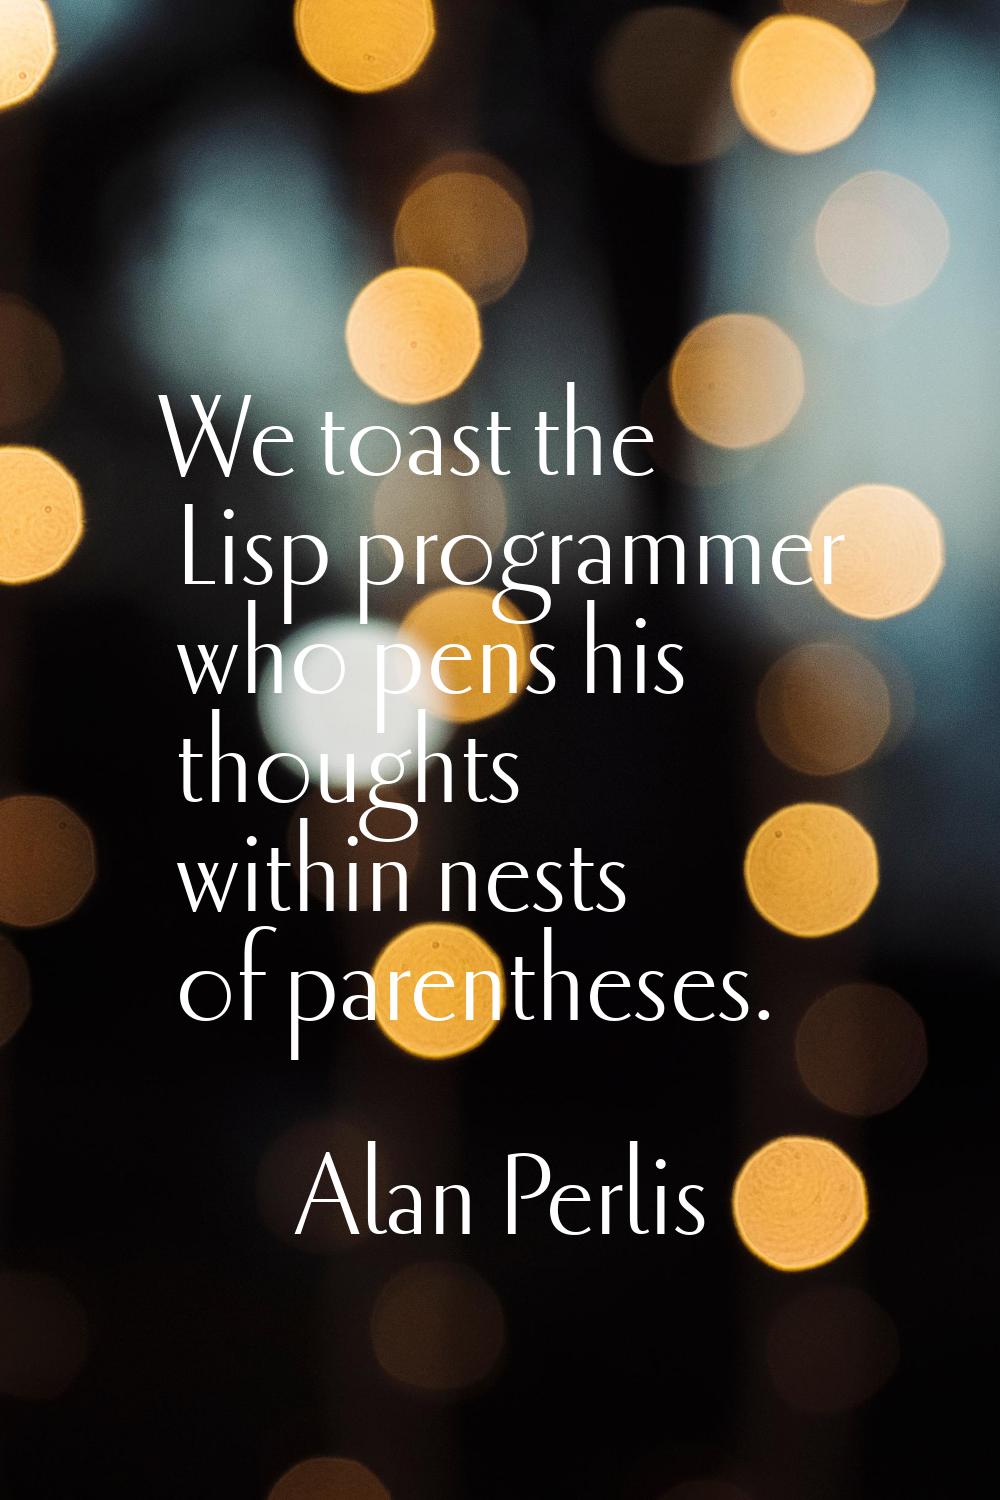 We toast the Lisp programmer who pens his thoughts within nests of parentheses.